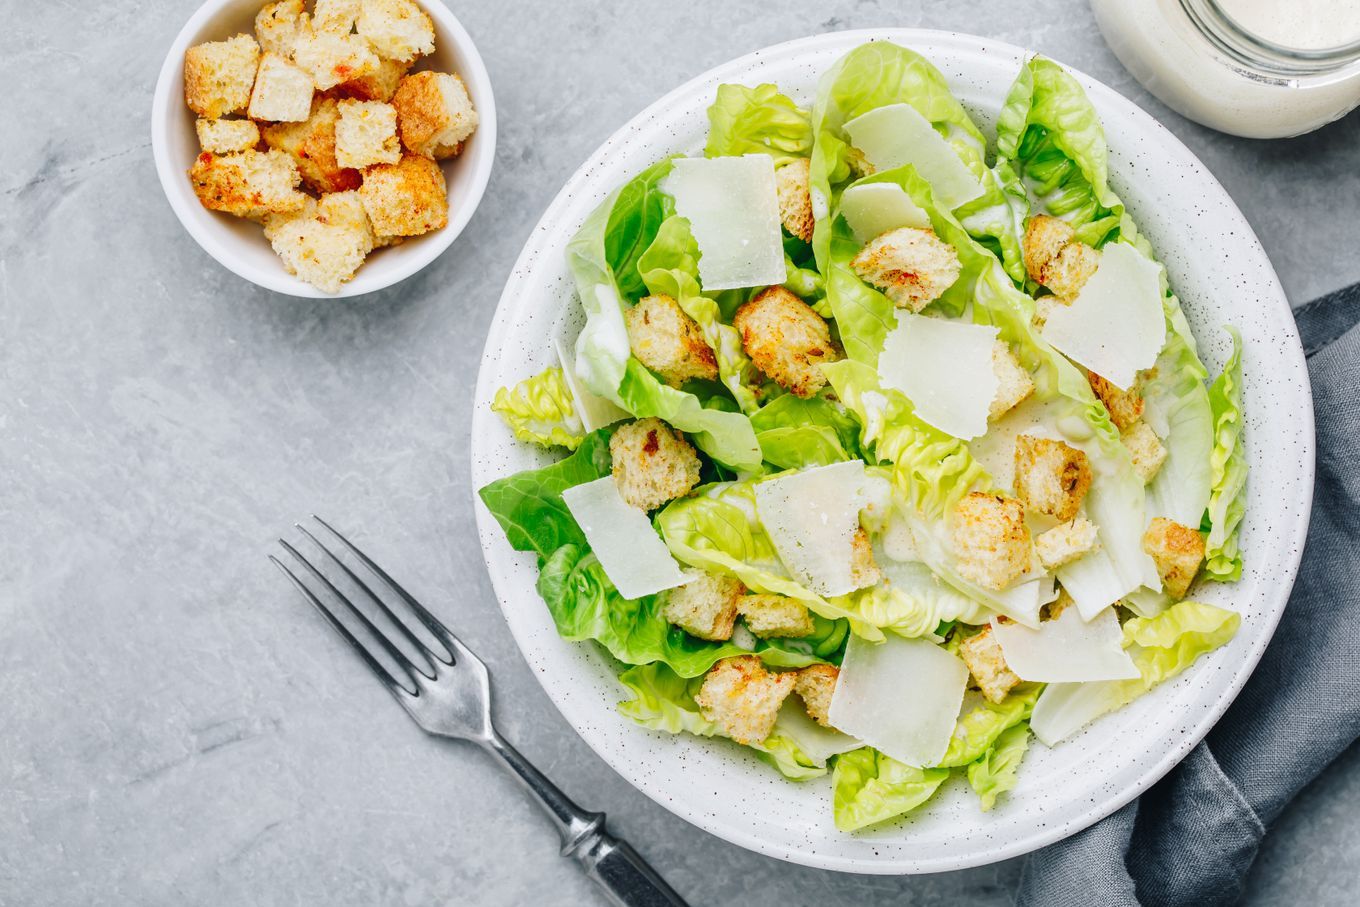 Caesar salad is a perfect summer lunch